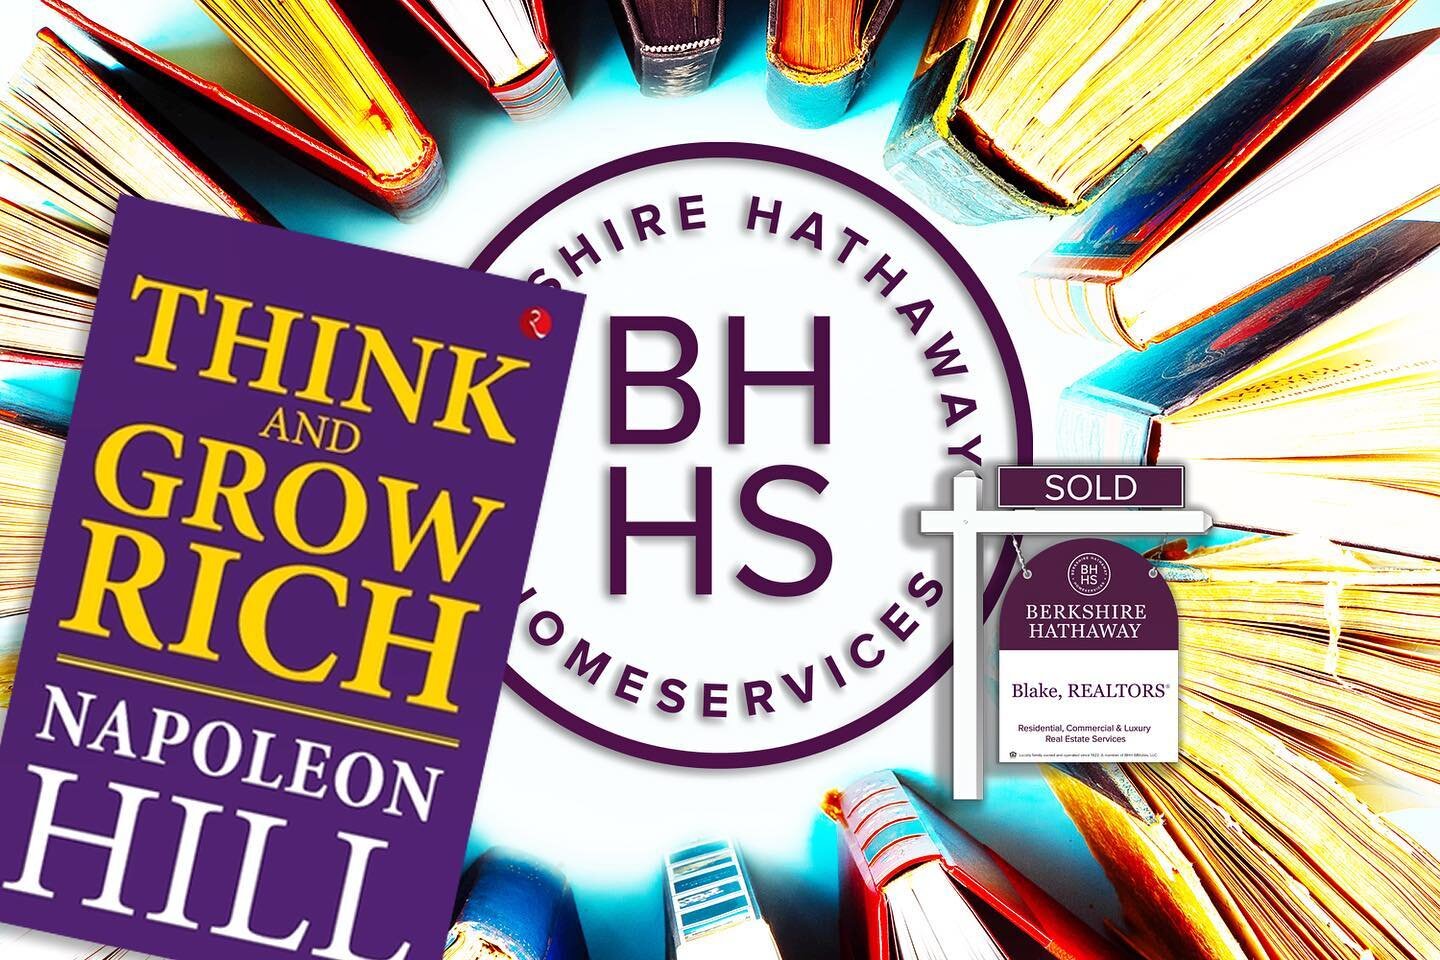 BHHS #bookclub picks back up Tuesday at 5:30pm with Ryan Clark leading the discussion about &ldquo;Think &amp; Grow Rich&rdquo; Chapters 3 &amp; 4. Text Ryan at 518-424-7287 if you would like to participate. #ingoodcompany #realtors #doers #learners